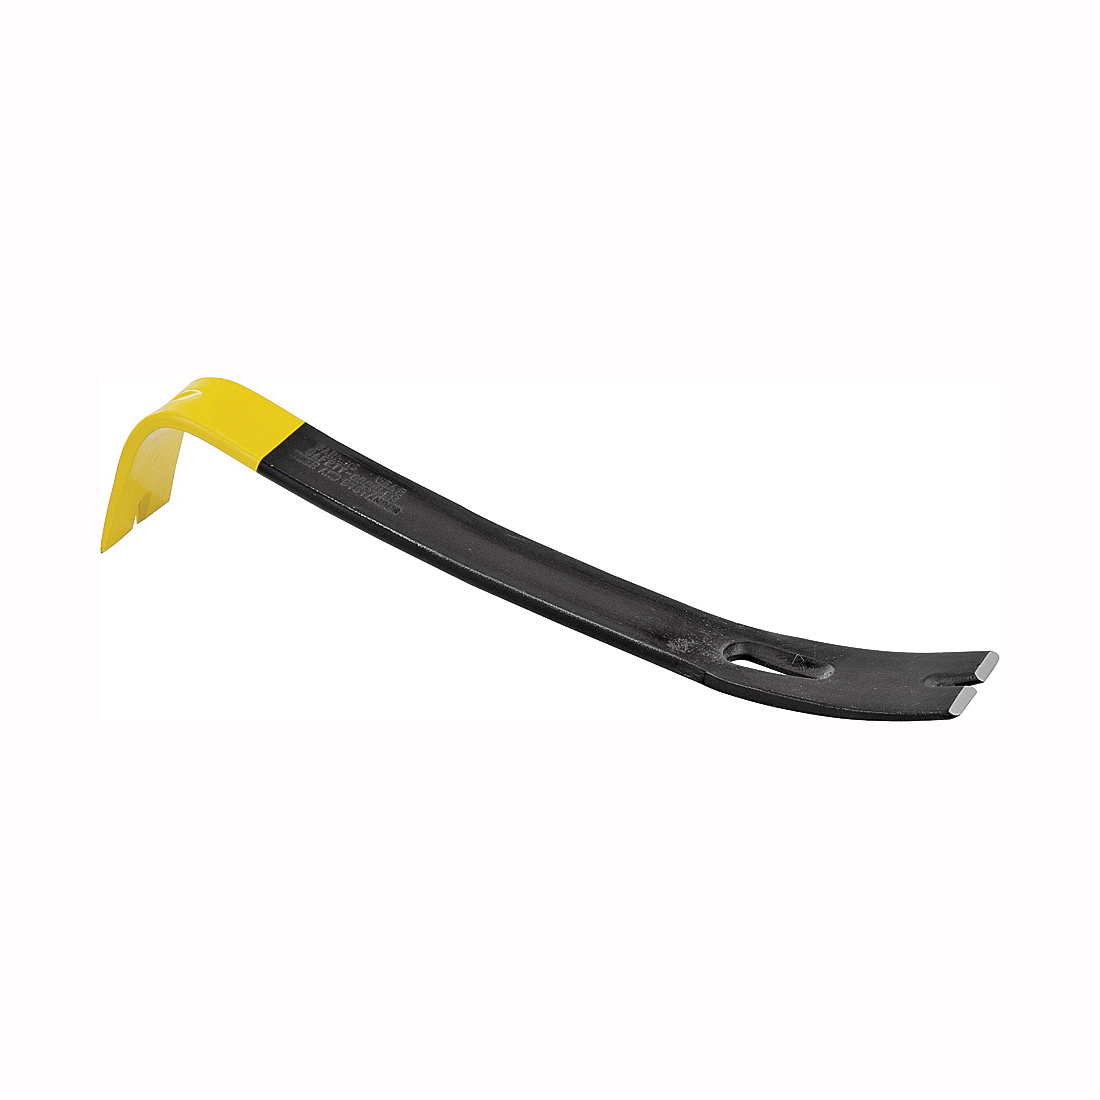 55-515 Pry Bar, 12-3/4 in L, Beveled Tip, 1-3/4 in Claw Blade Width 1, 1-3/4 in Claw Blade Width 2 Tip, HCS